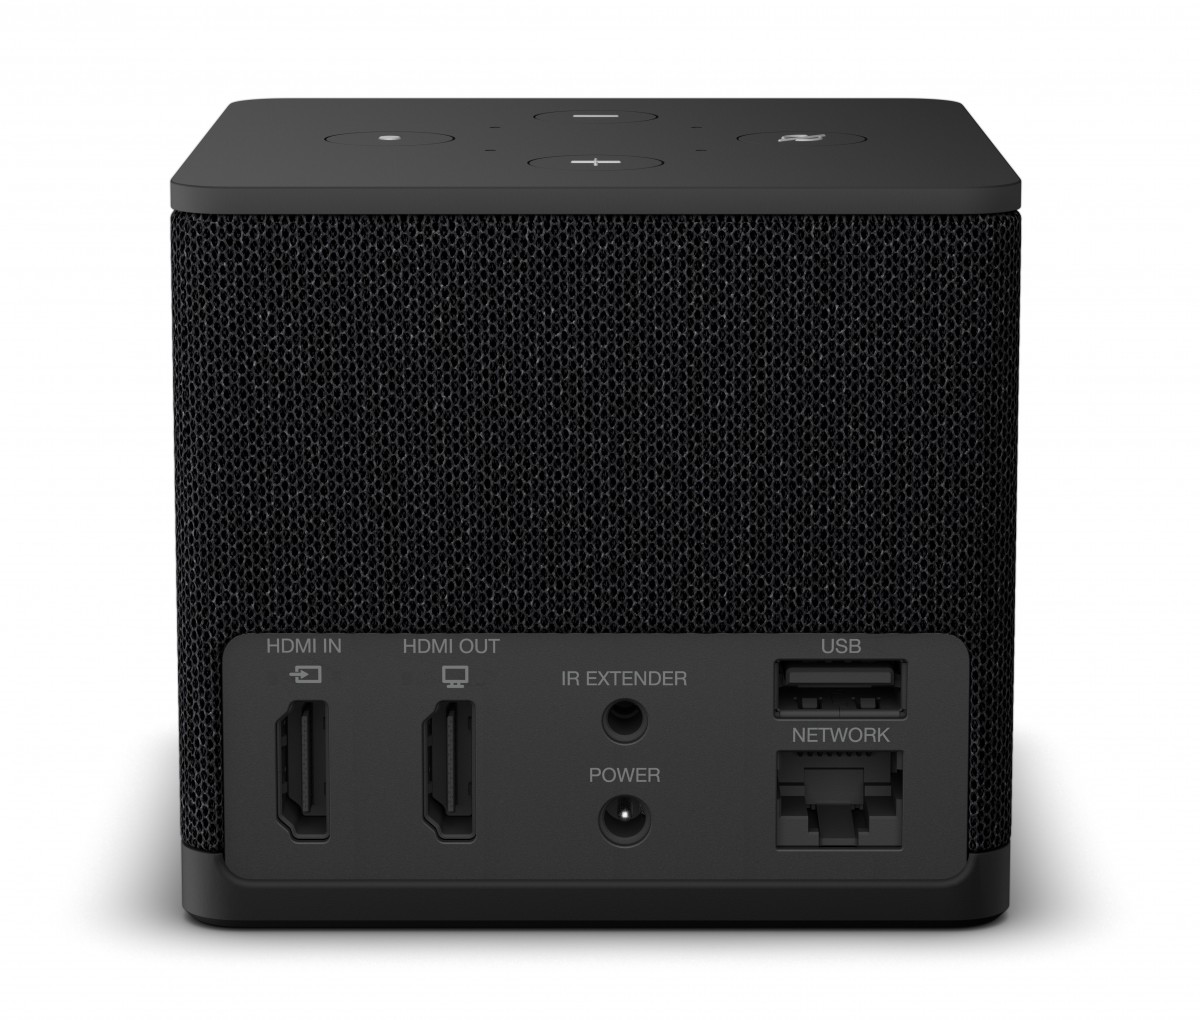 Amazon Announces Third Generation Fire TV Cube and New Alexa Voice Remote Pro